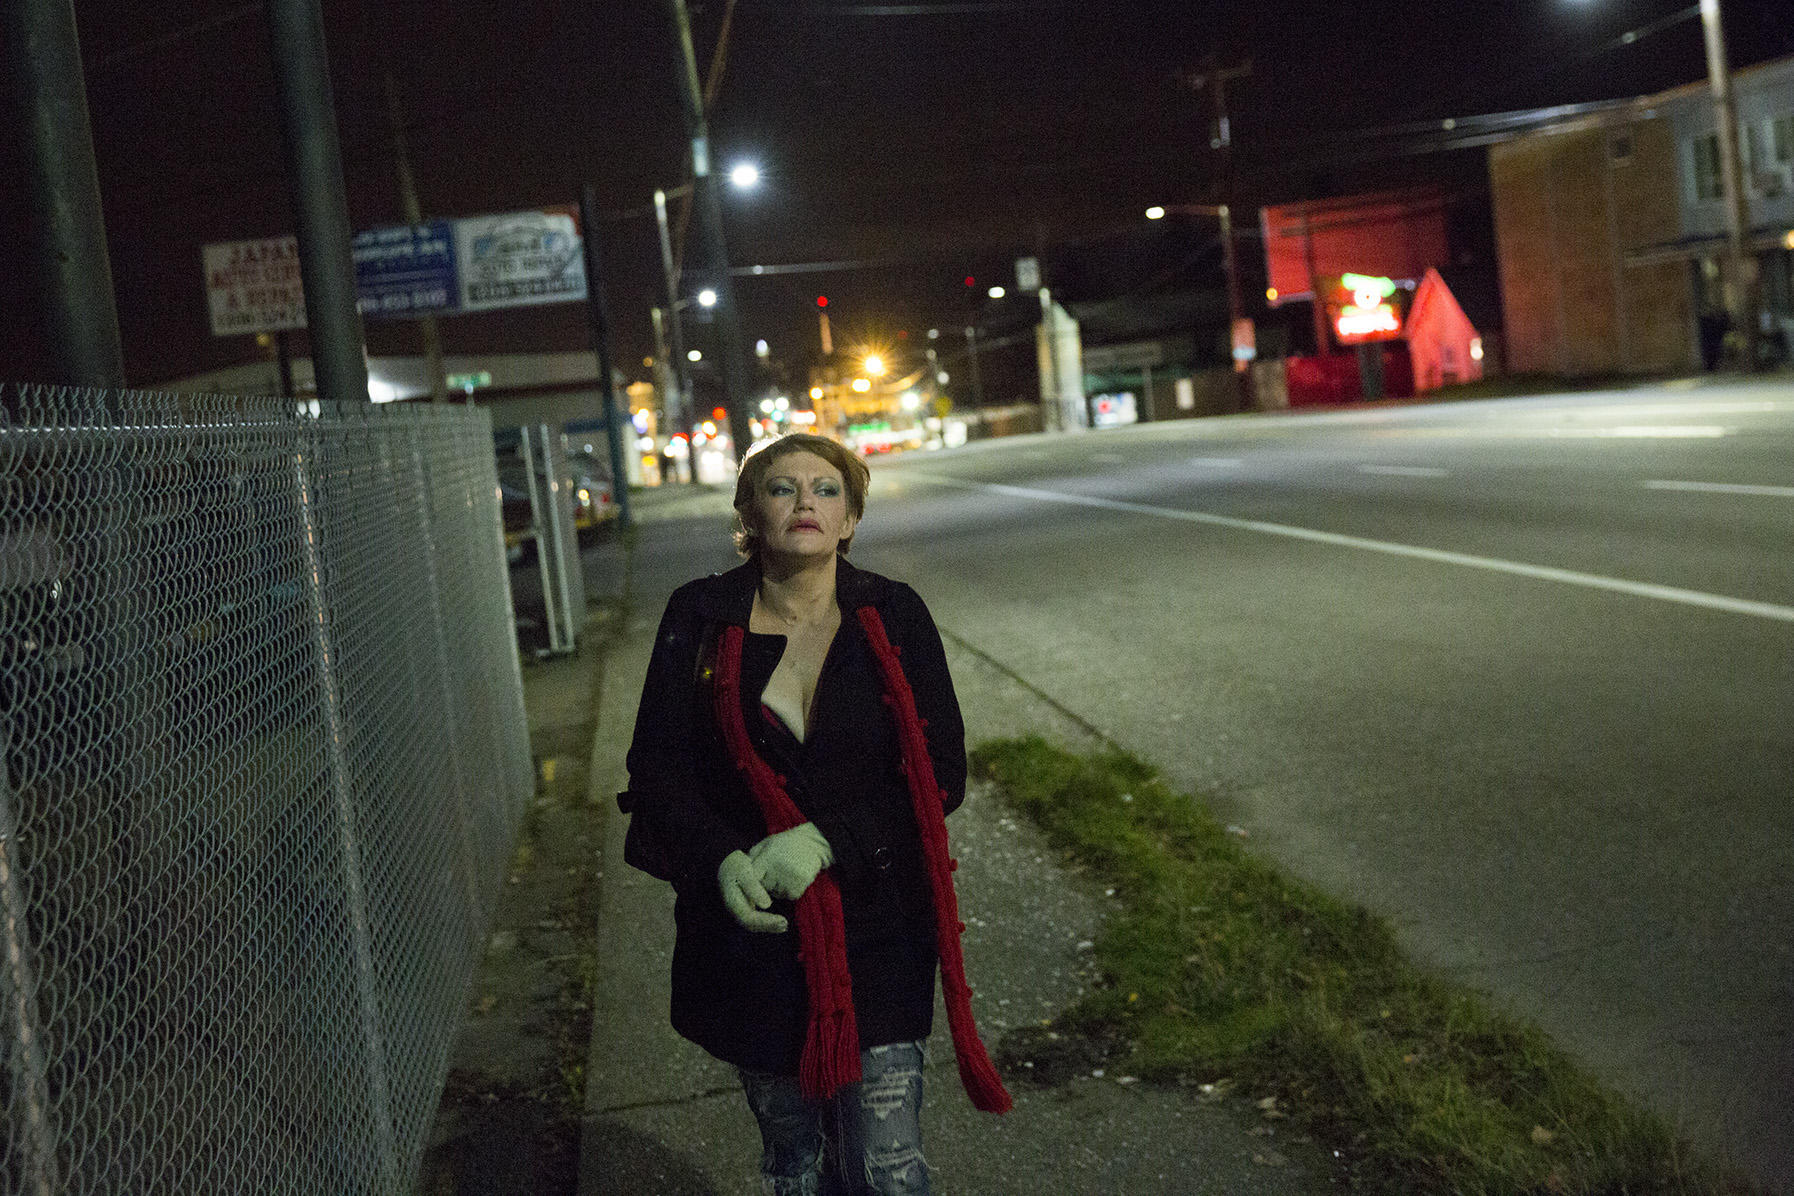 Family-run businesses hurt by Aurora Avenue prostitution